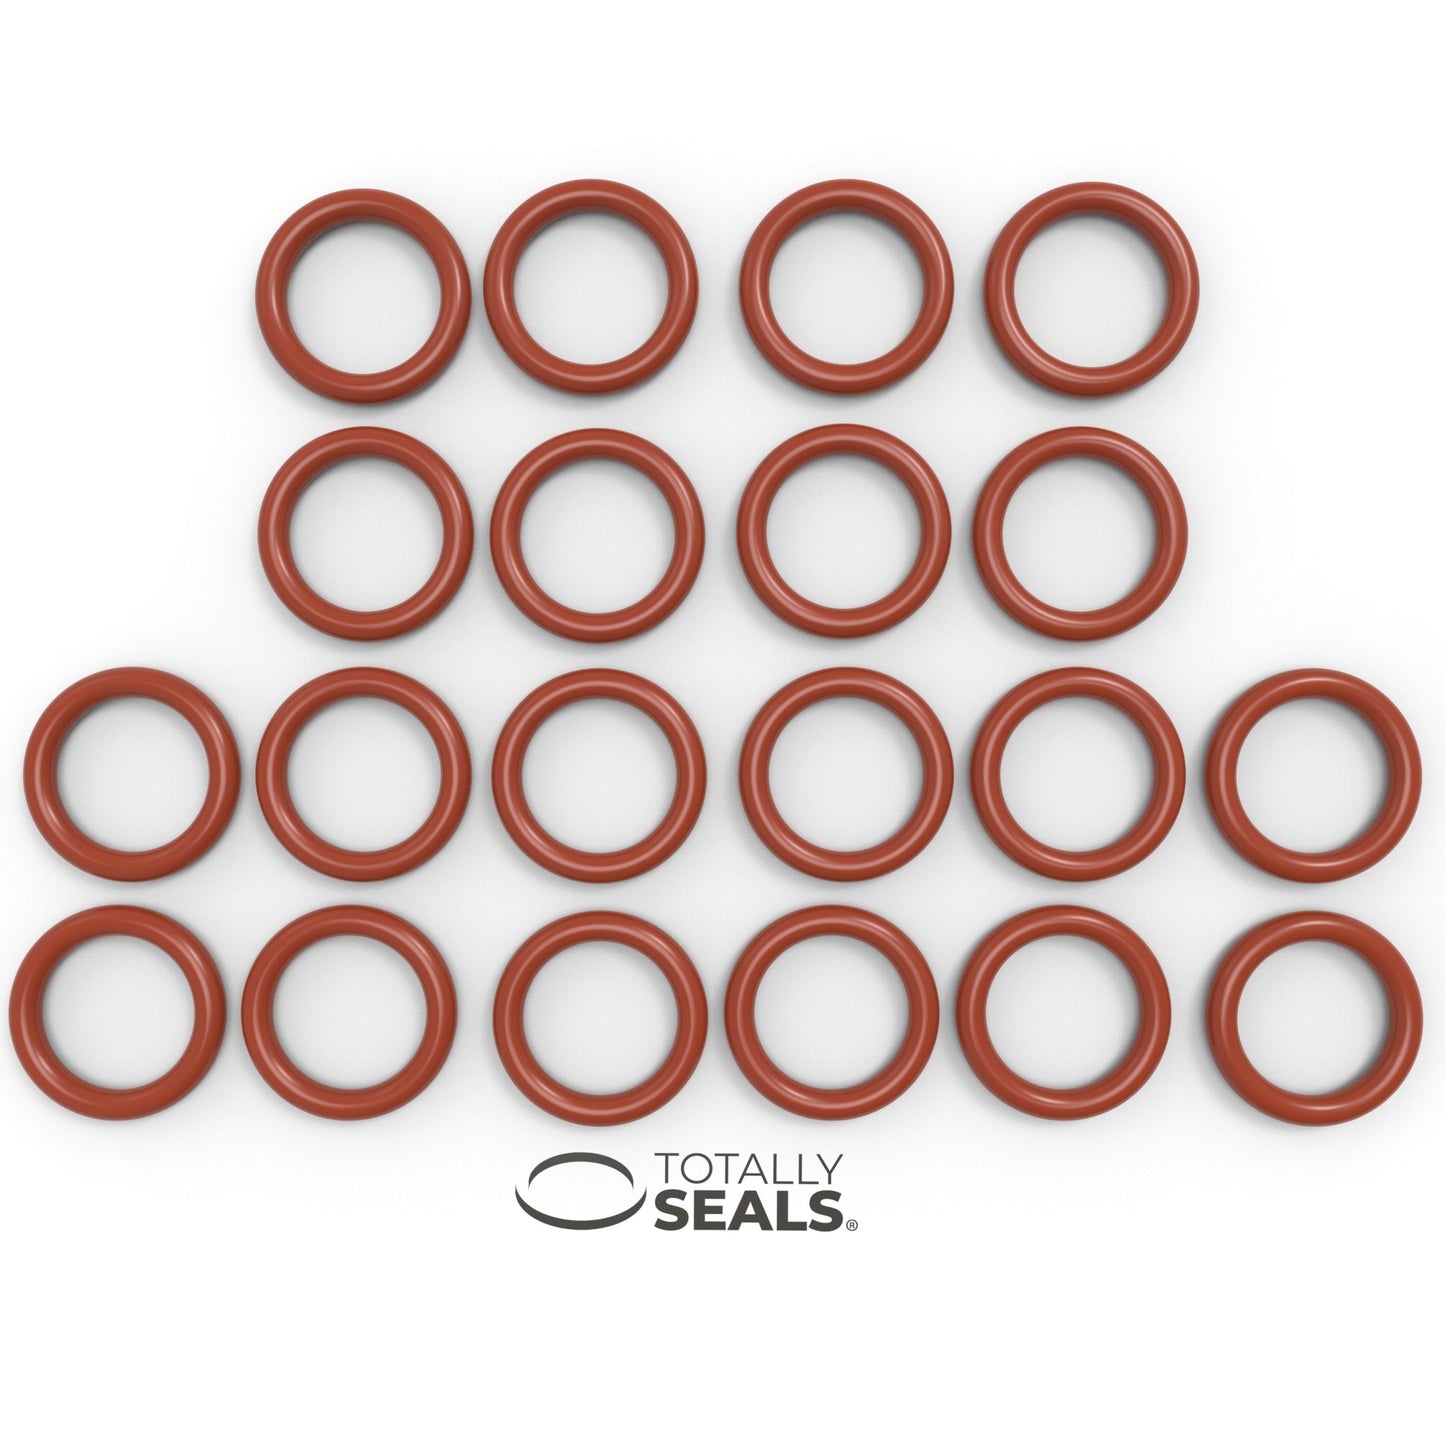 20mm x 3mm (26mm OD) Silicone O-Rings - Totally Seals®